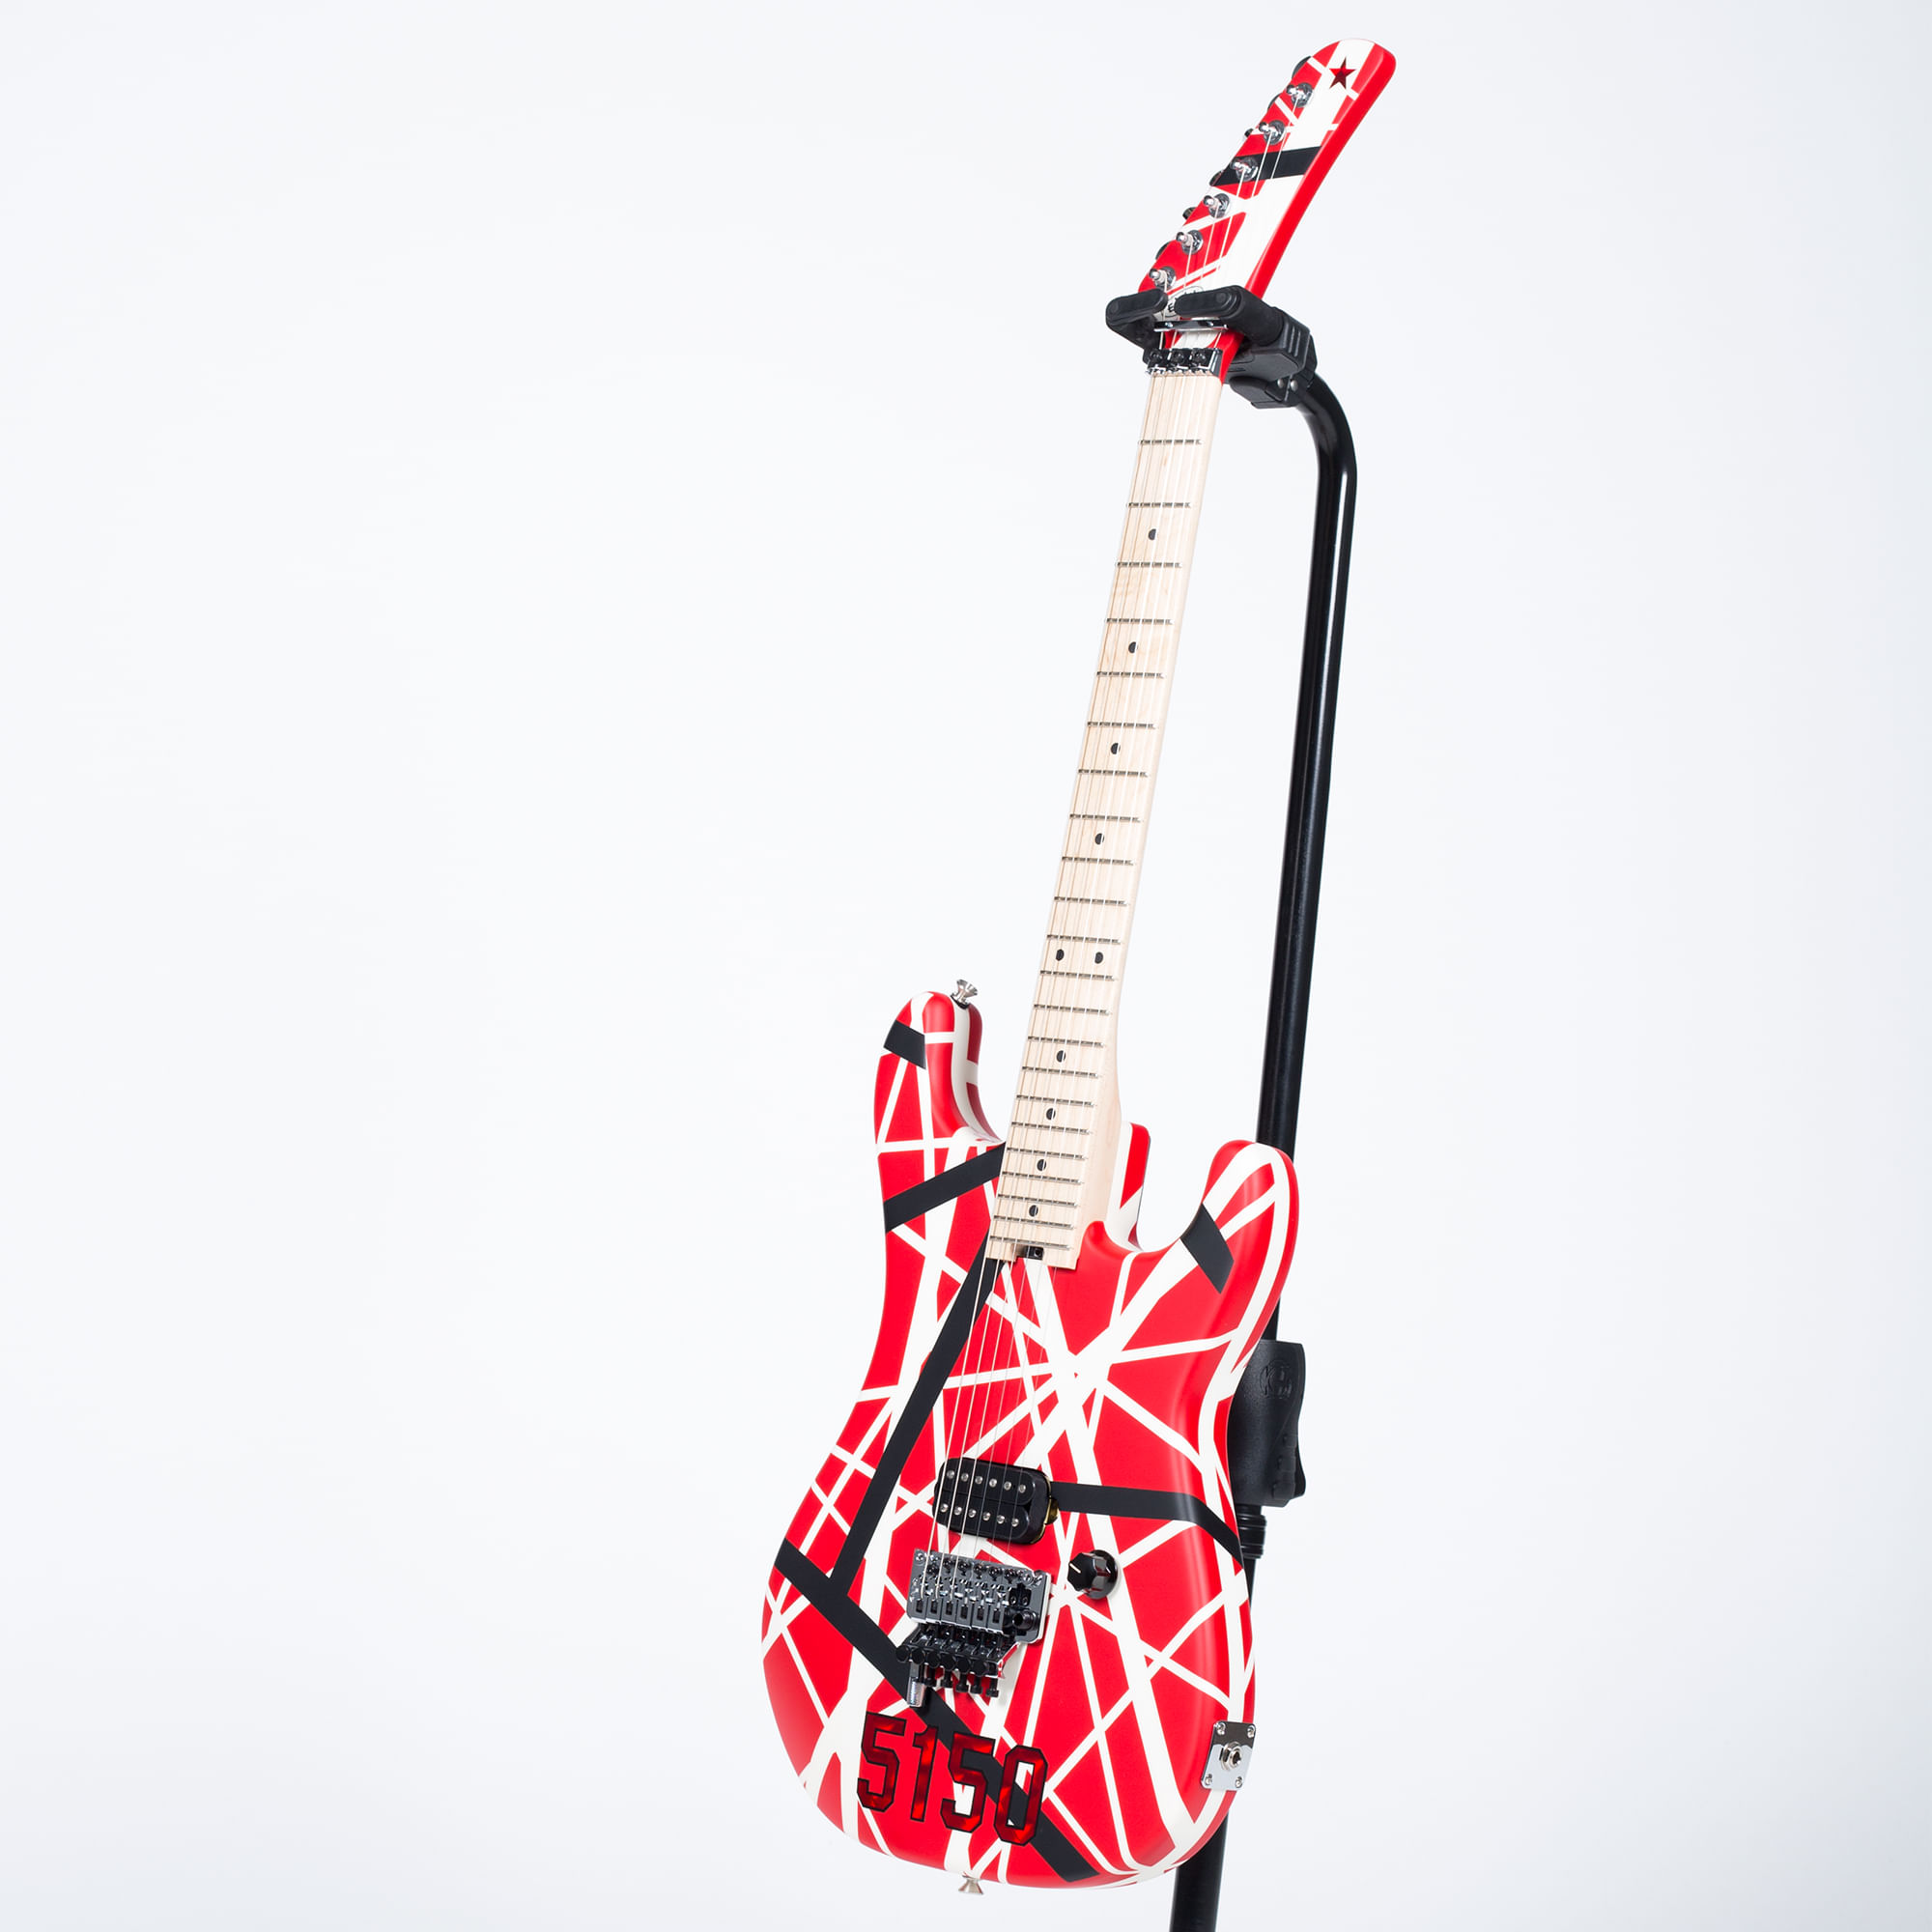 EVH　5150　Red/Black/White　Guitar　Electric　Striped　Series　Music　Stripes　Cosmo